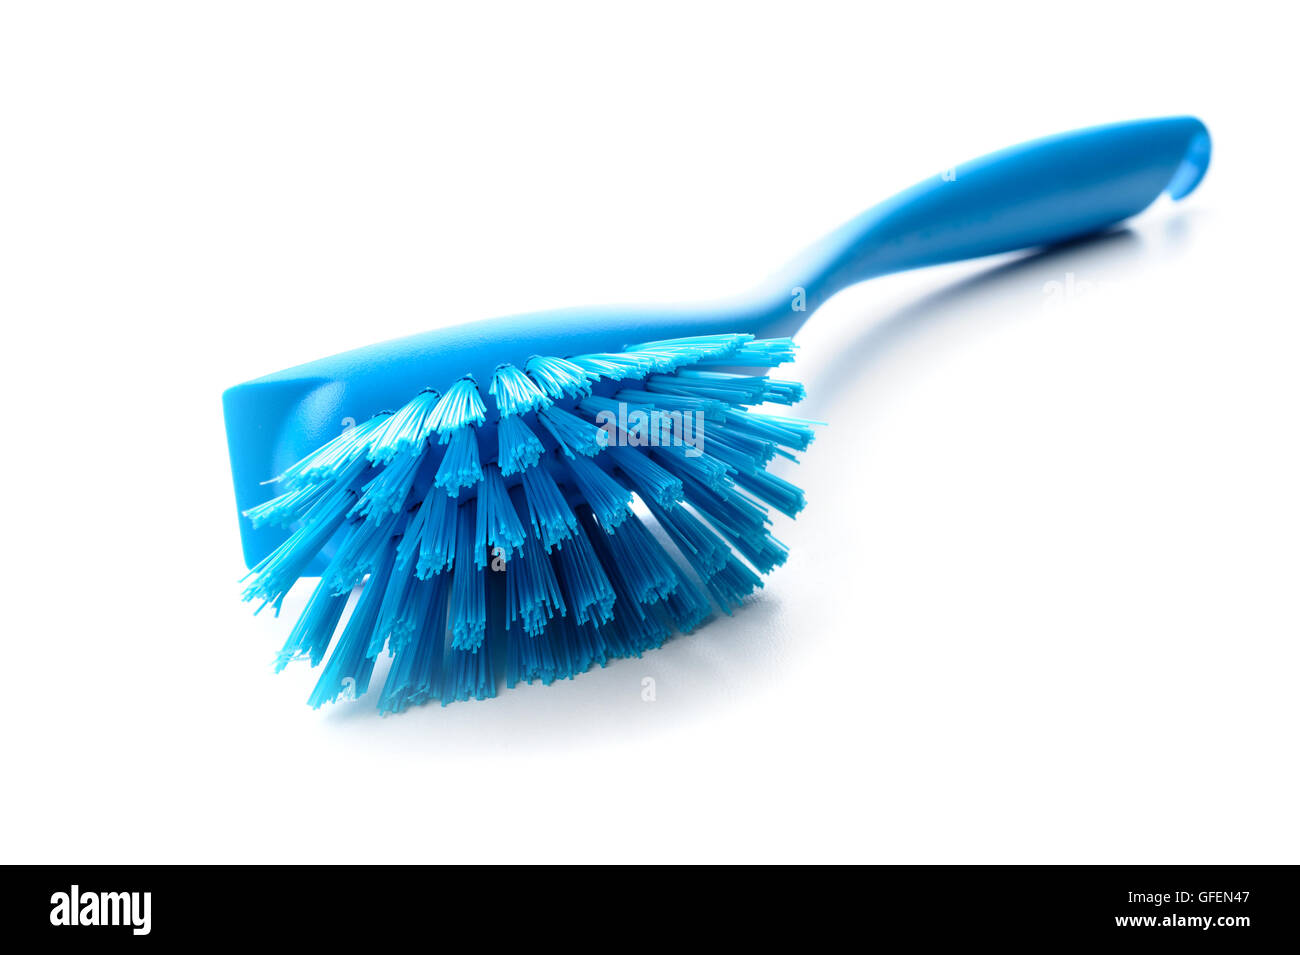 Pipe Cleaner Brush On A White Background Stock Photo, Picture and